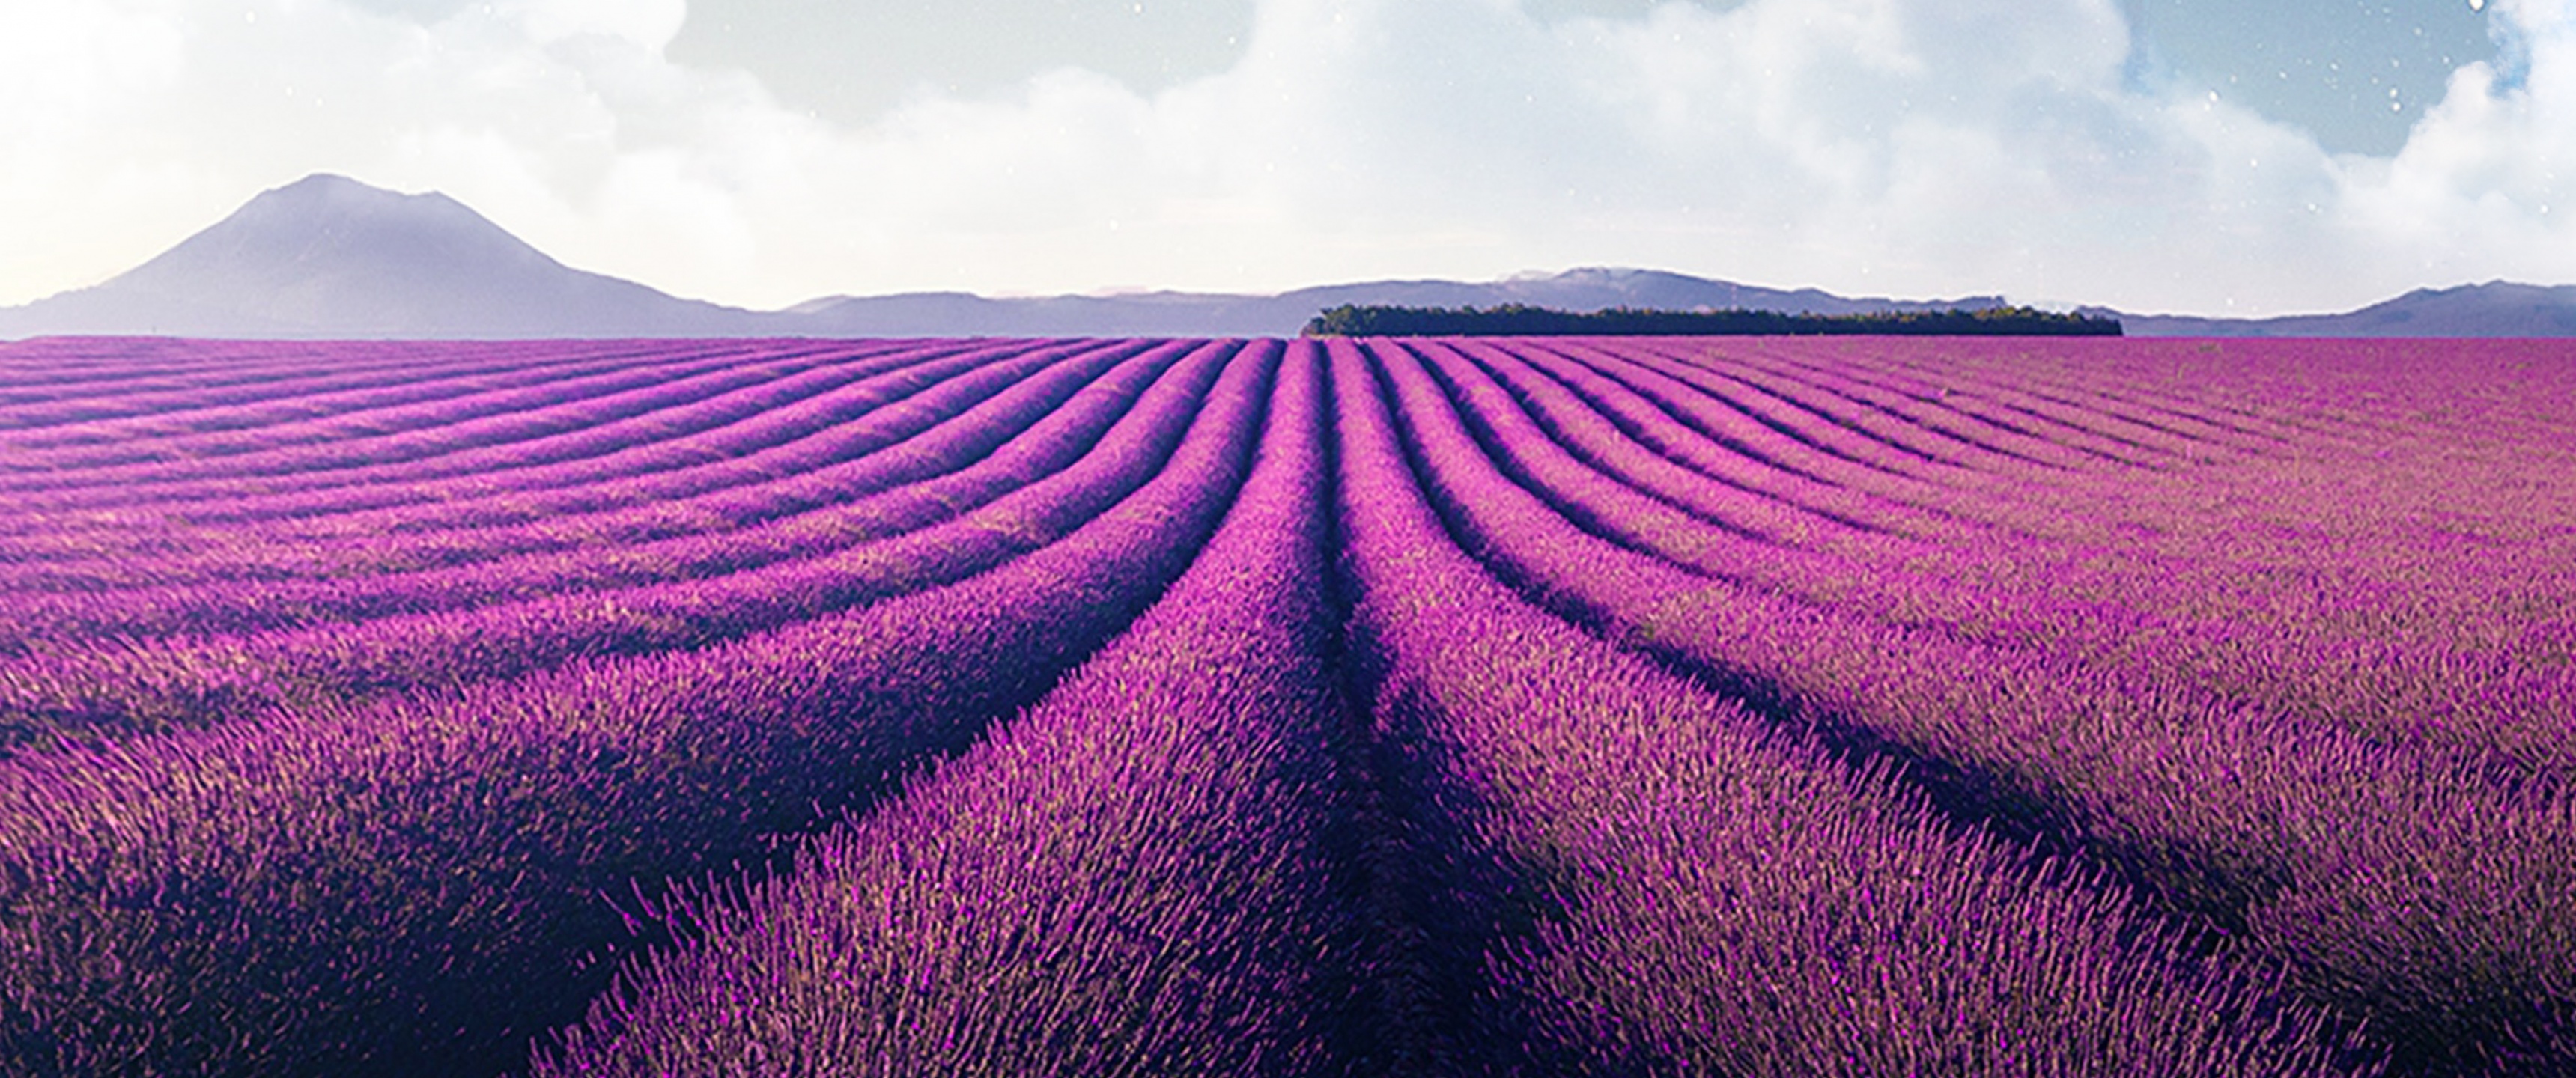 Download wallpaper 1350x2400 lavender field mountain landscape art  iphone 876s6 for parallax hd background